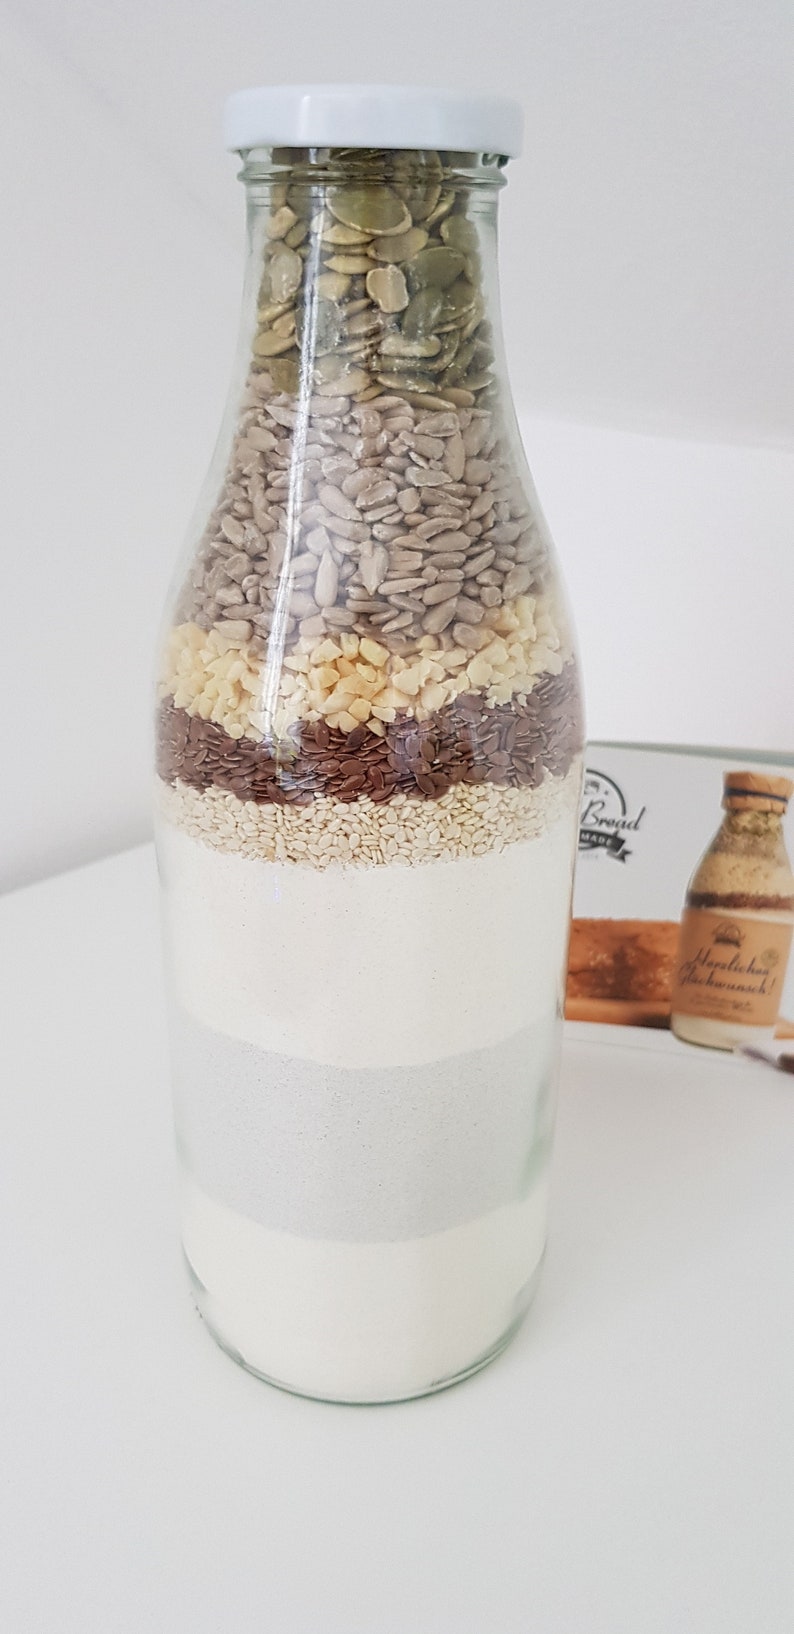 BottleBread Best Dad Baking Mix Bread Baking Mix in a Glass Bottle Gift for Father's Day Father's Day Gift image 5